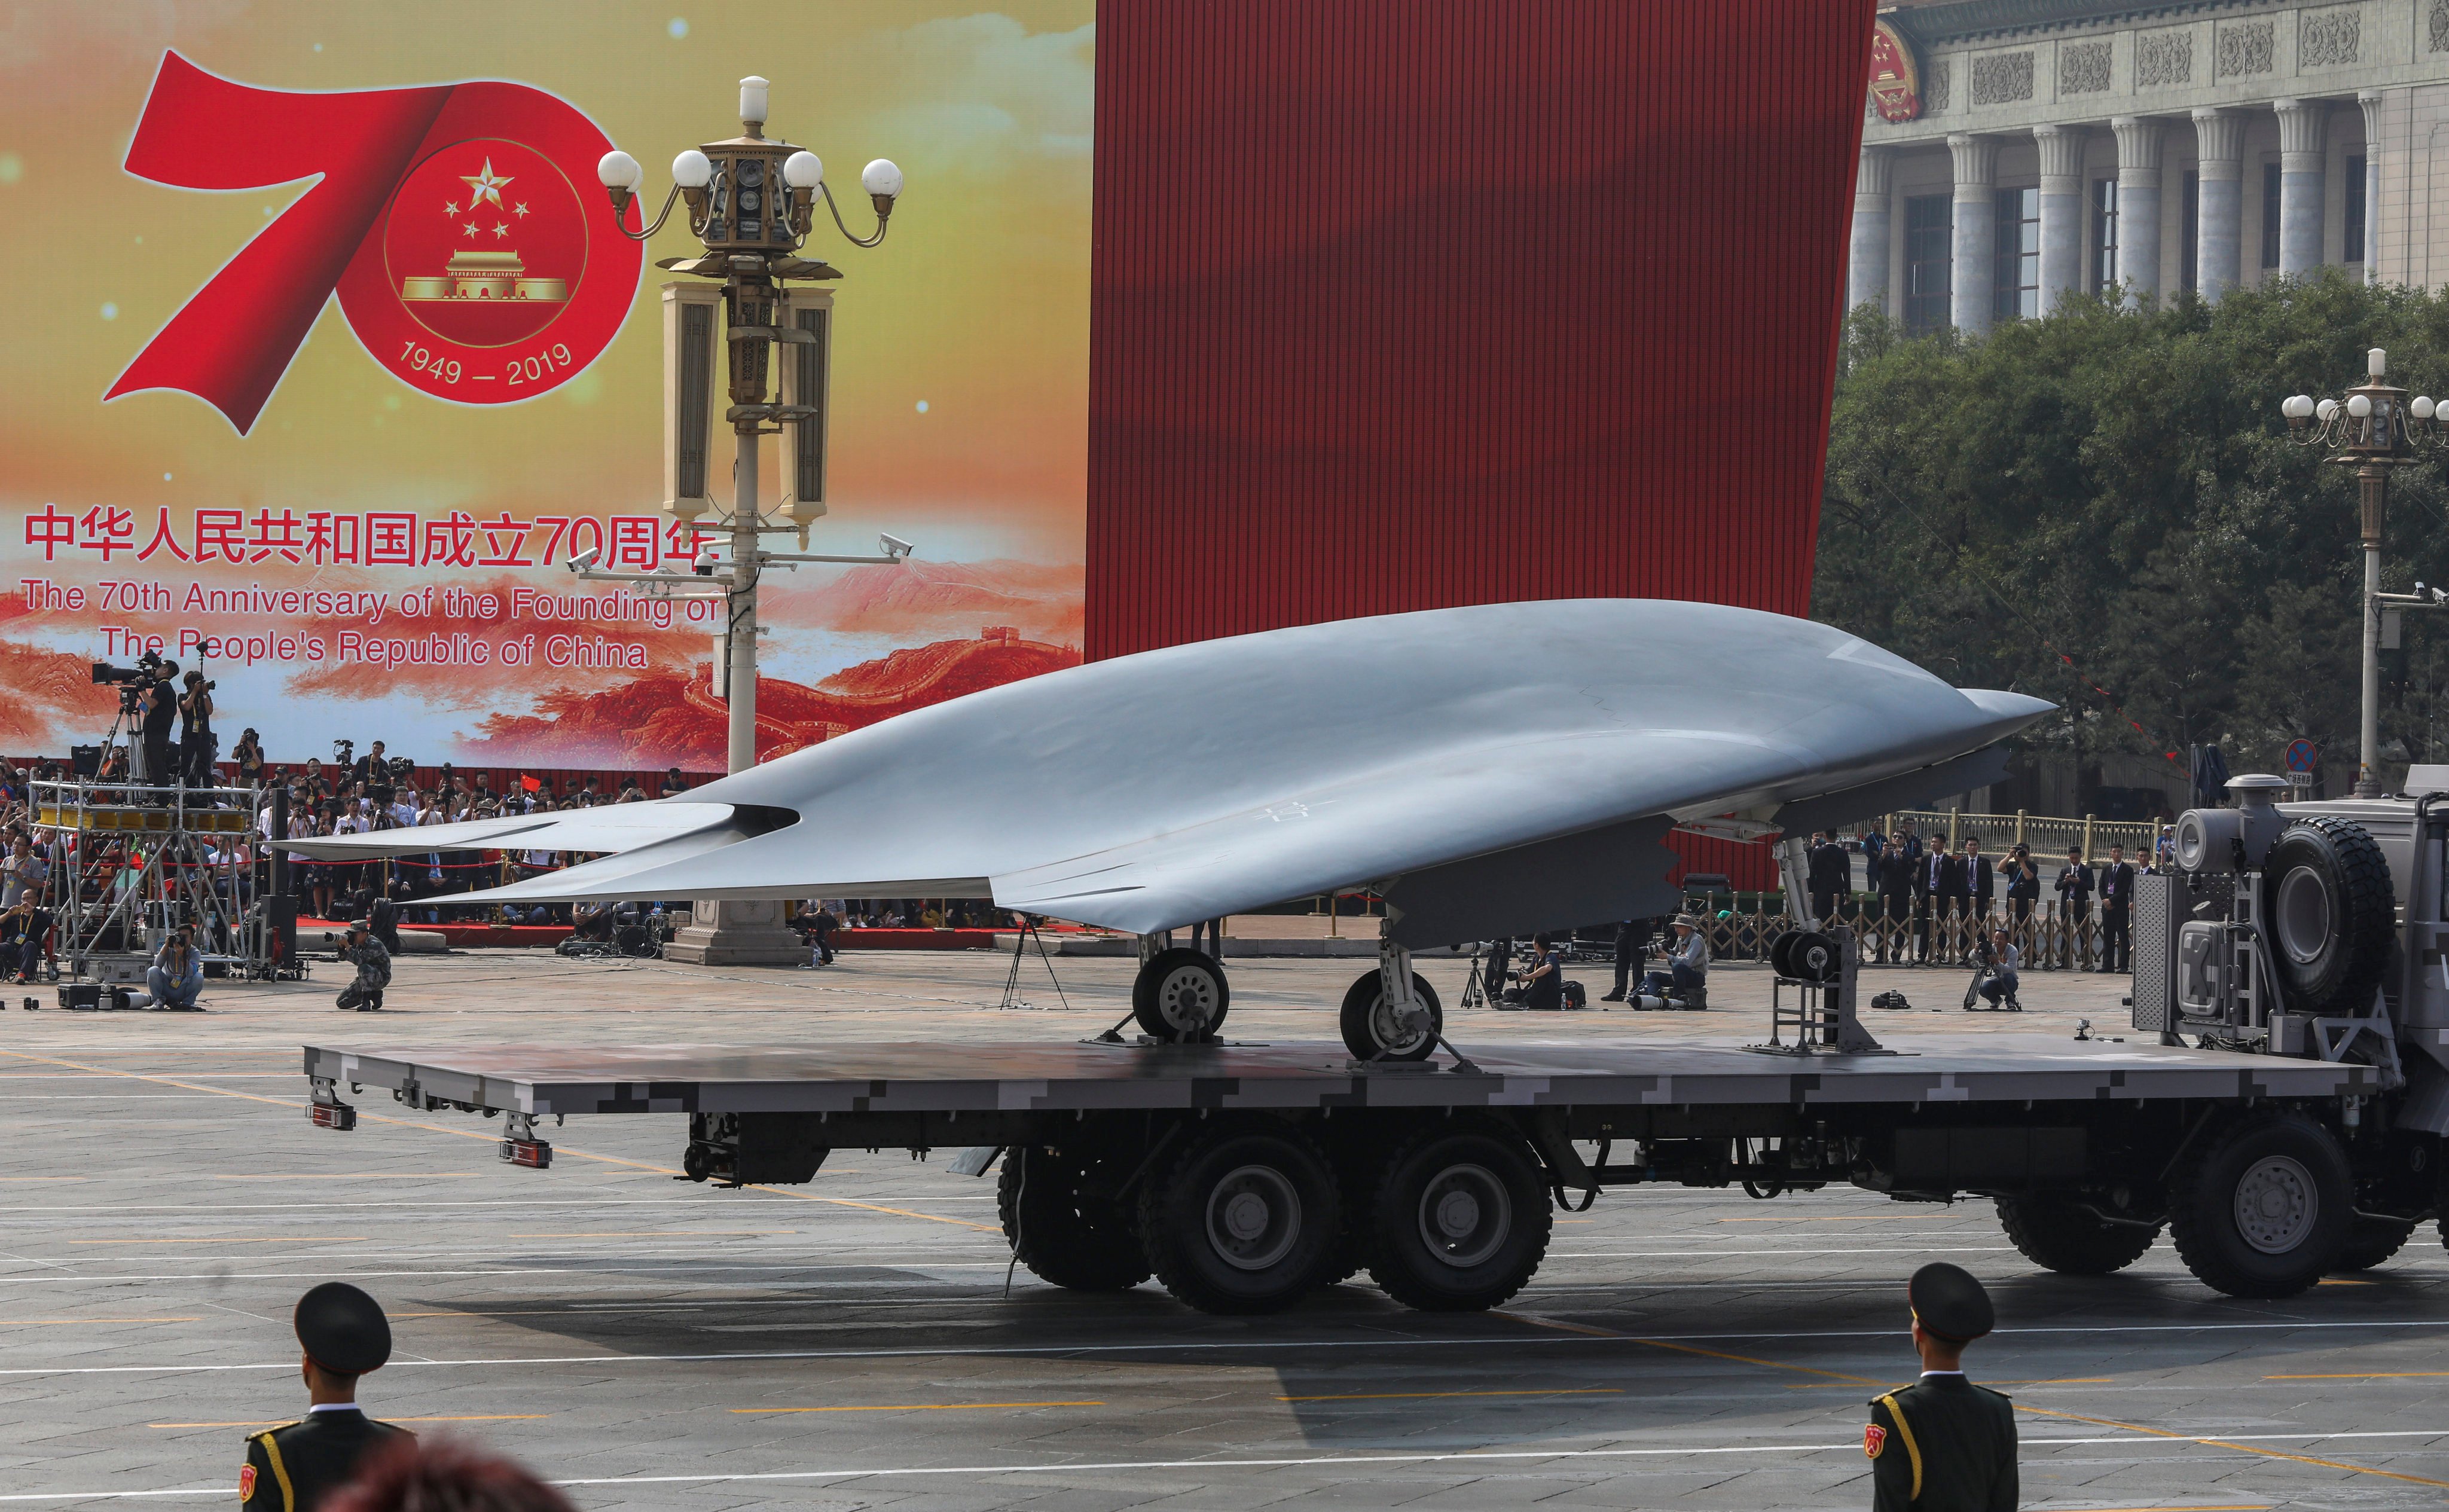 A military drone on display during a parade to mark the 70th anniversary of the People’s Republic of China, in Beijing on October 1, 2019. Photo: Simon Song